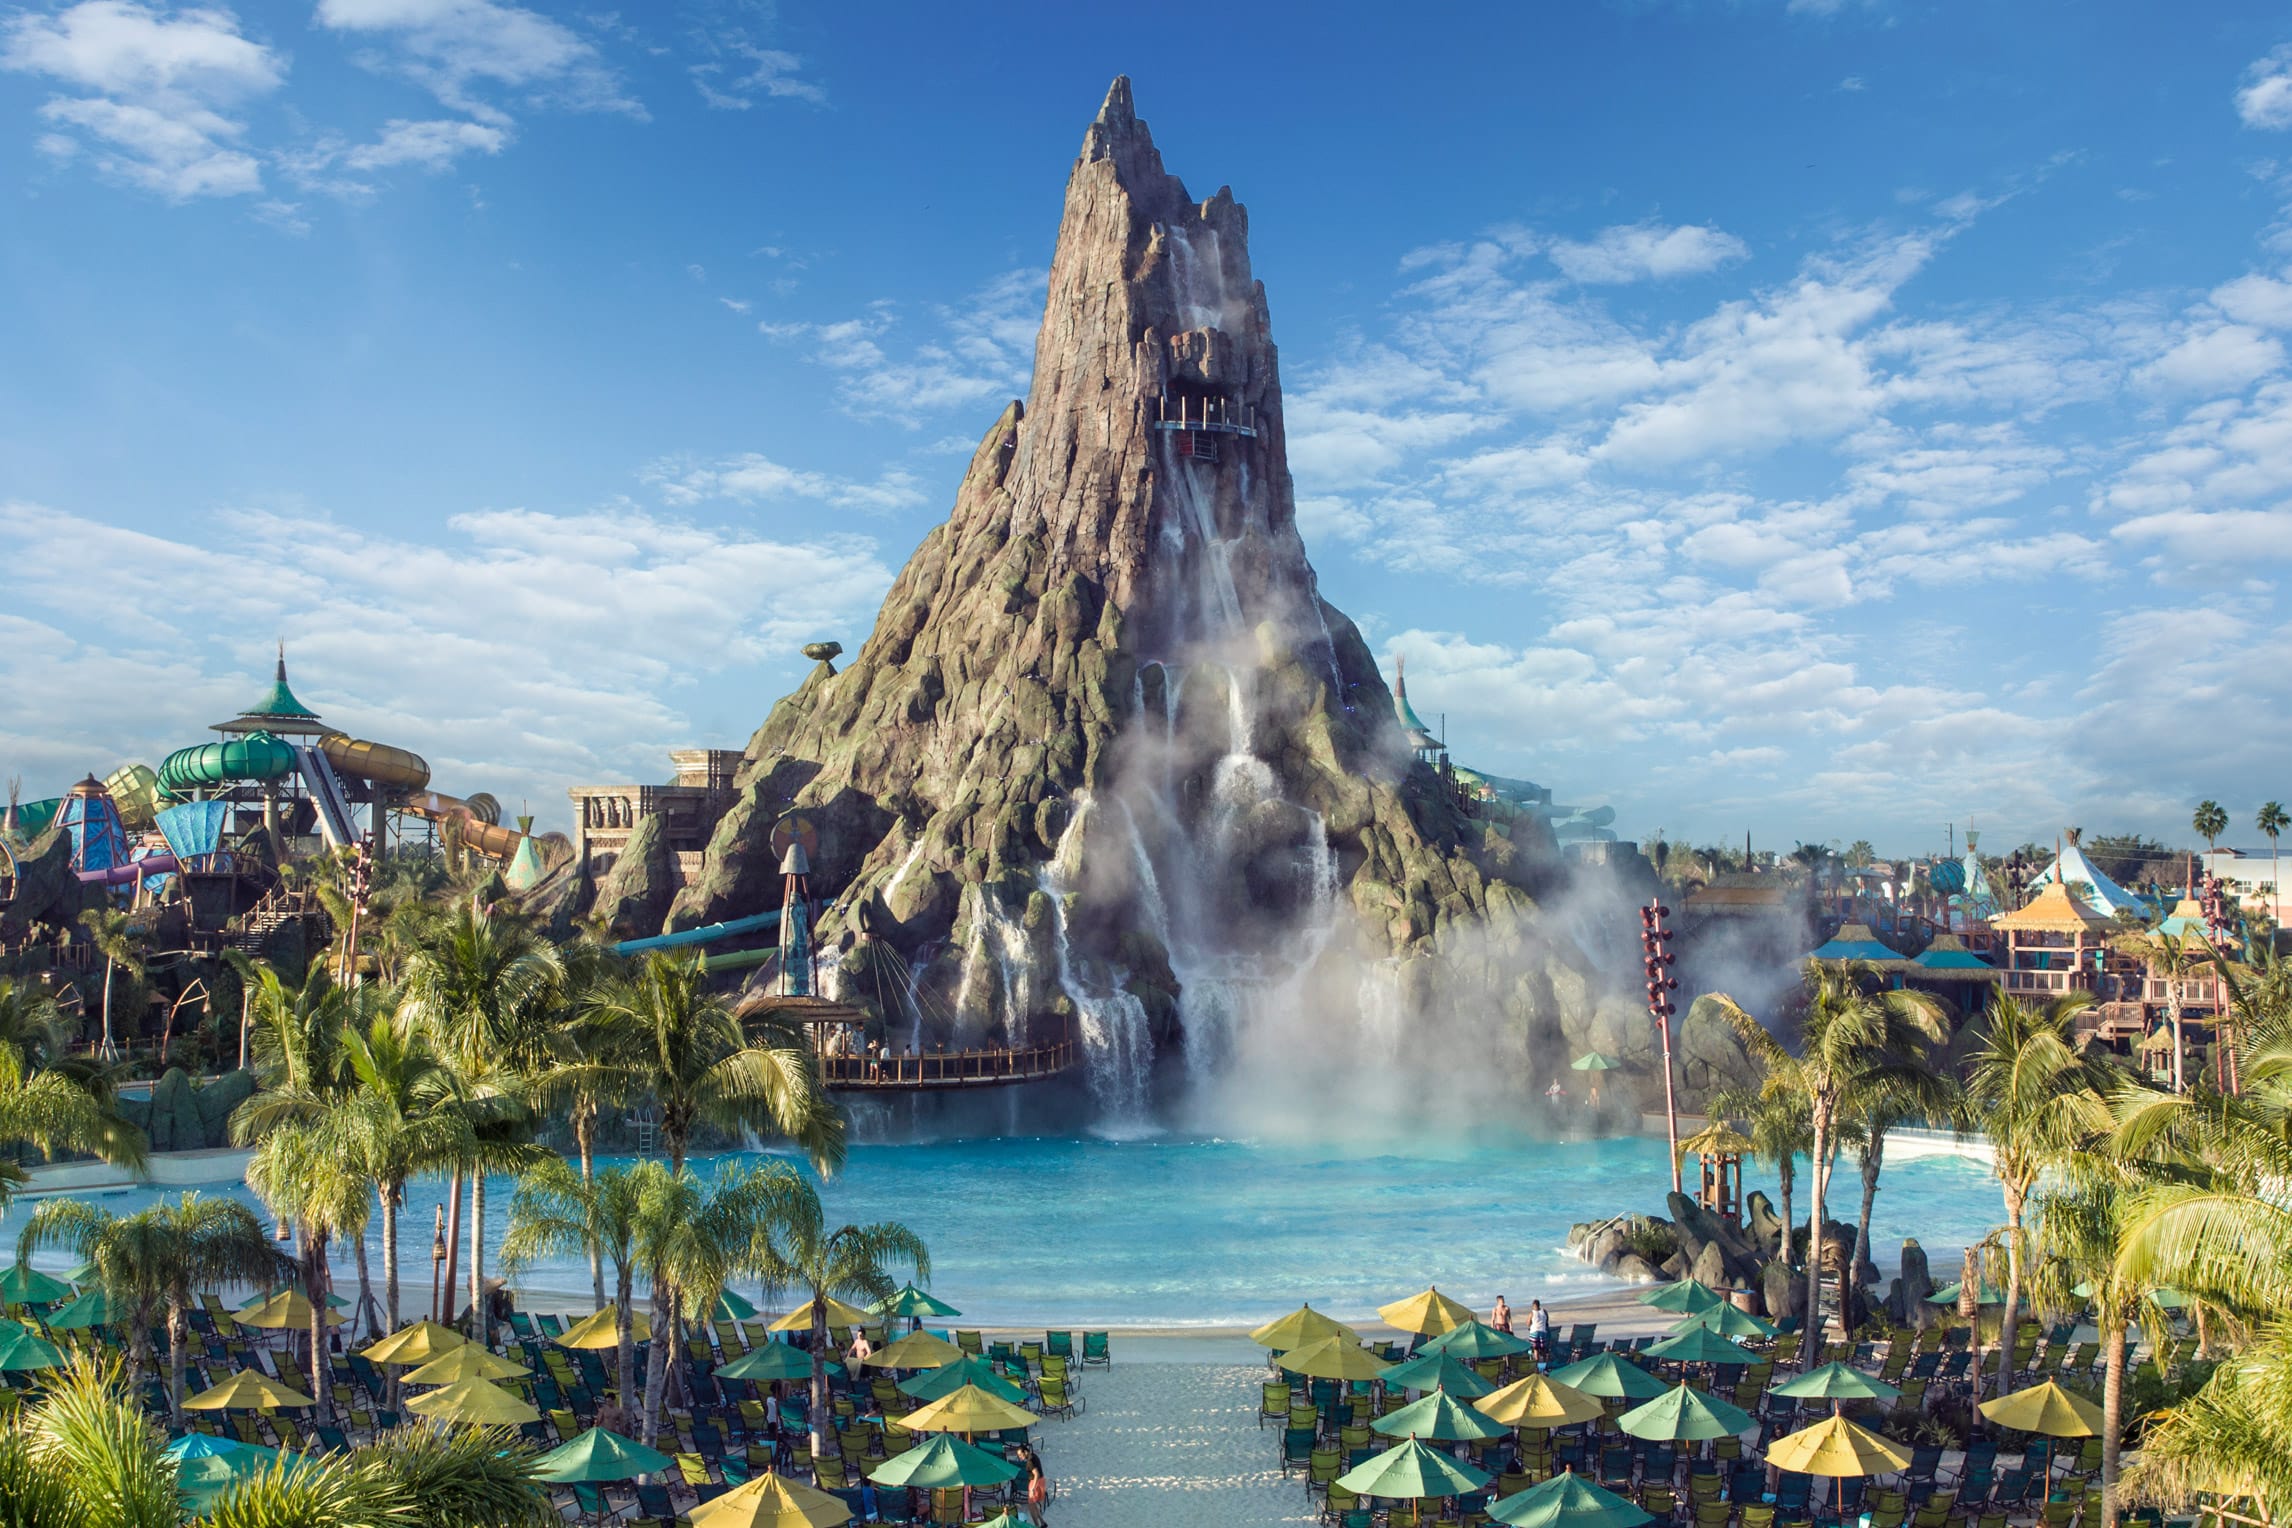 At Universal's Volcano Bay water theme park, you can spend the day relaxing amidst tropical beauty and experiencing thrilling water rides.